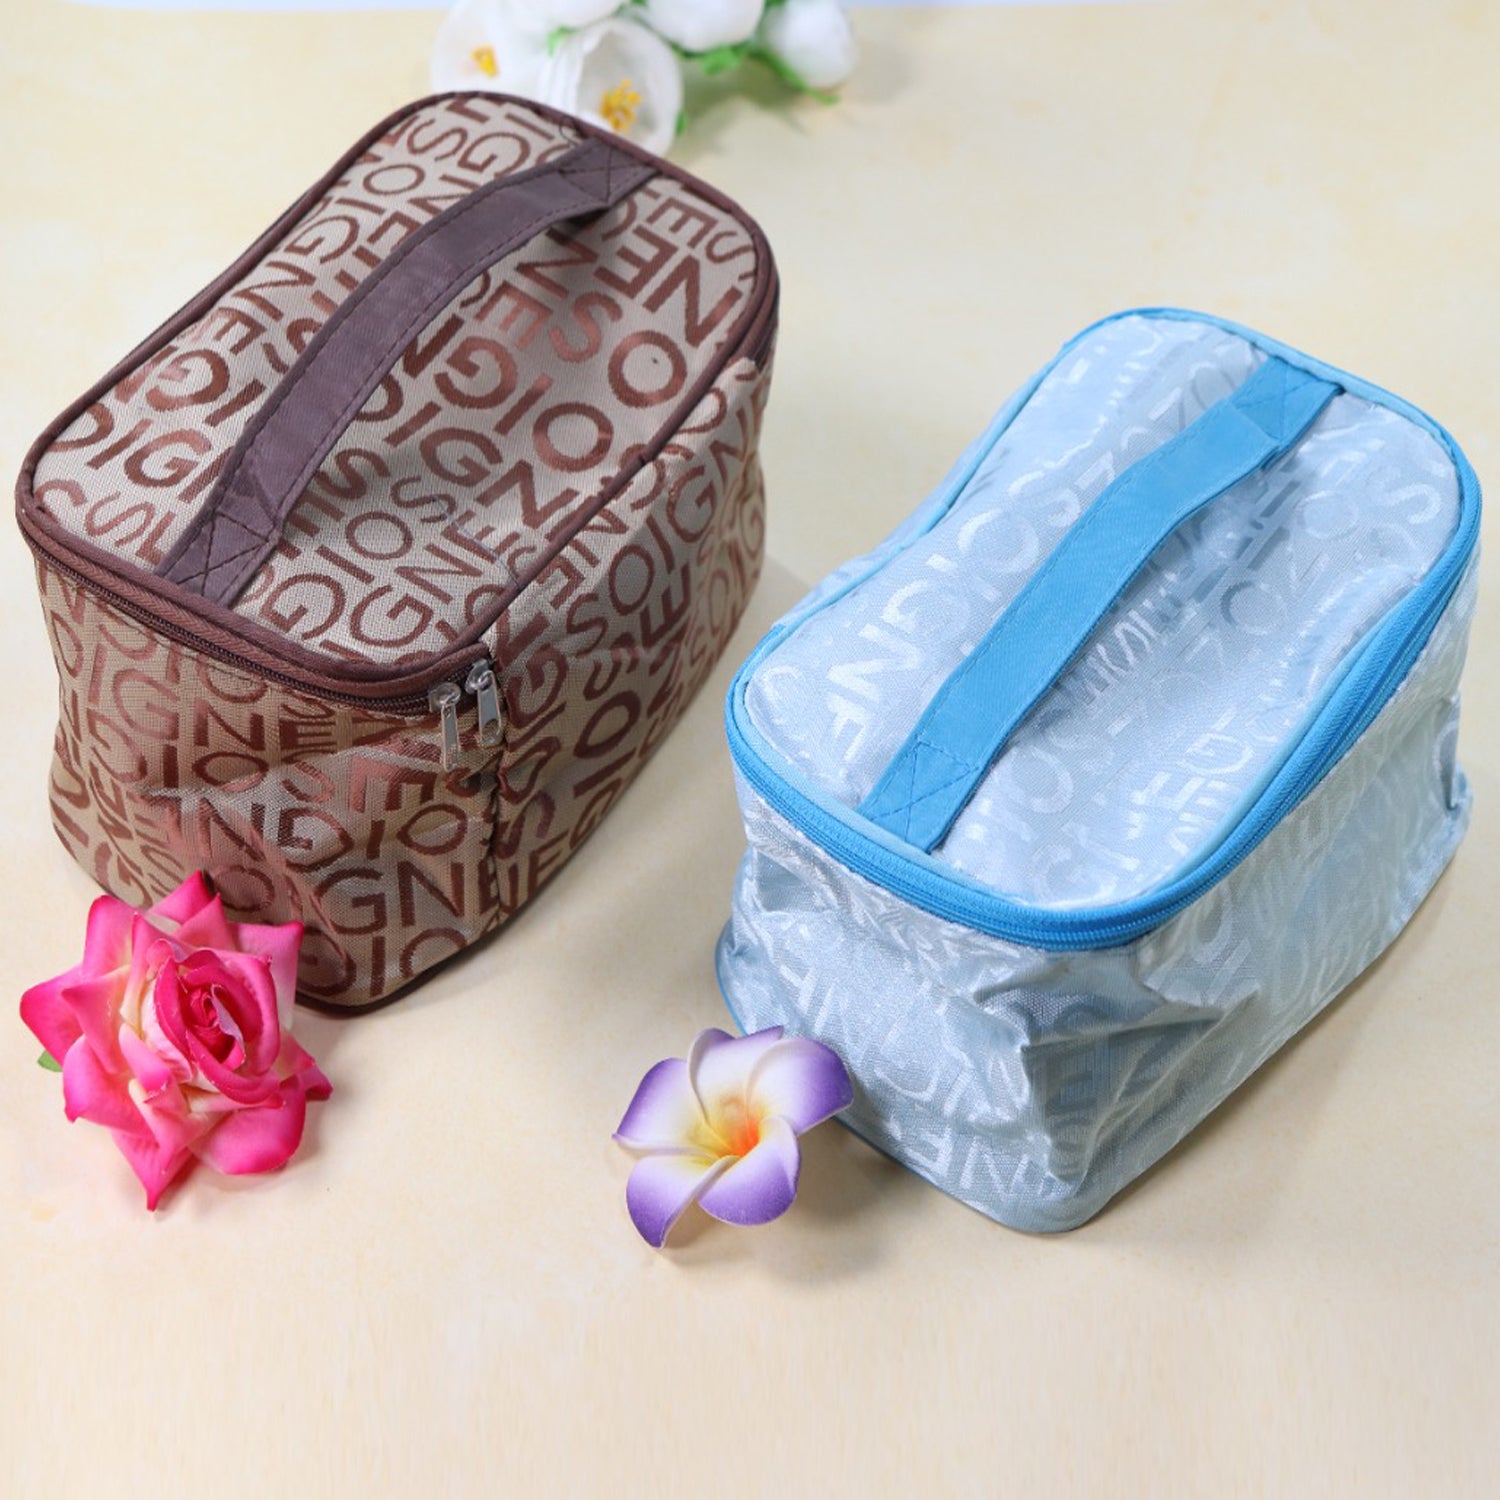 6228 PORTABLE MAKEUP BAG WIDELY USED BY WOMEN’S FOR STORING THEIR MAKEUP EQUIPMENT’S AND ALL WHILE TRAVELLING AND MOVING. 